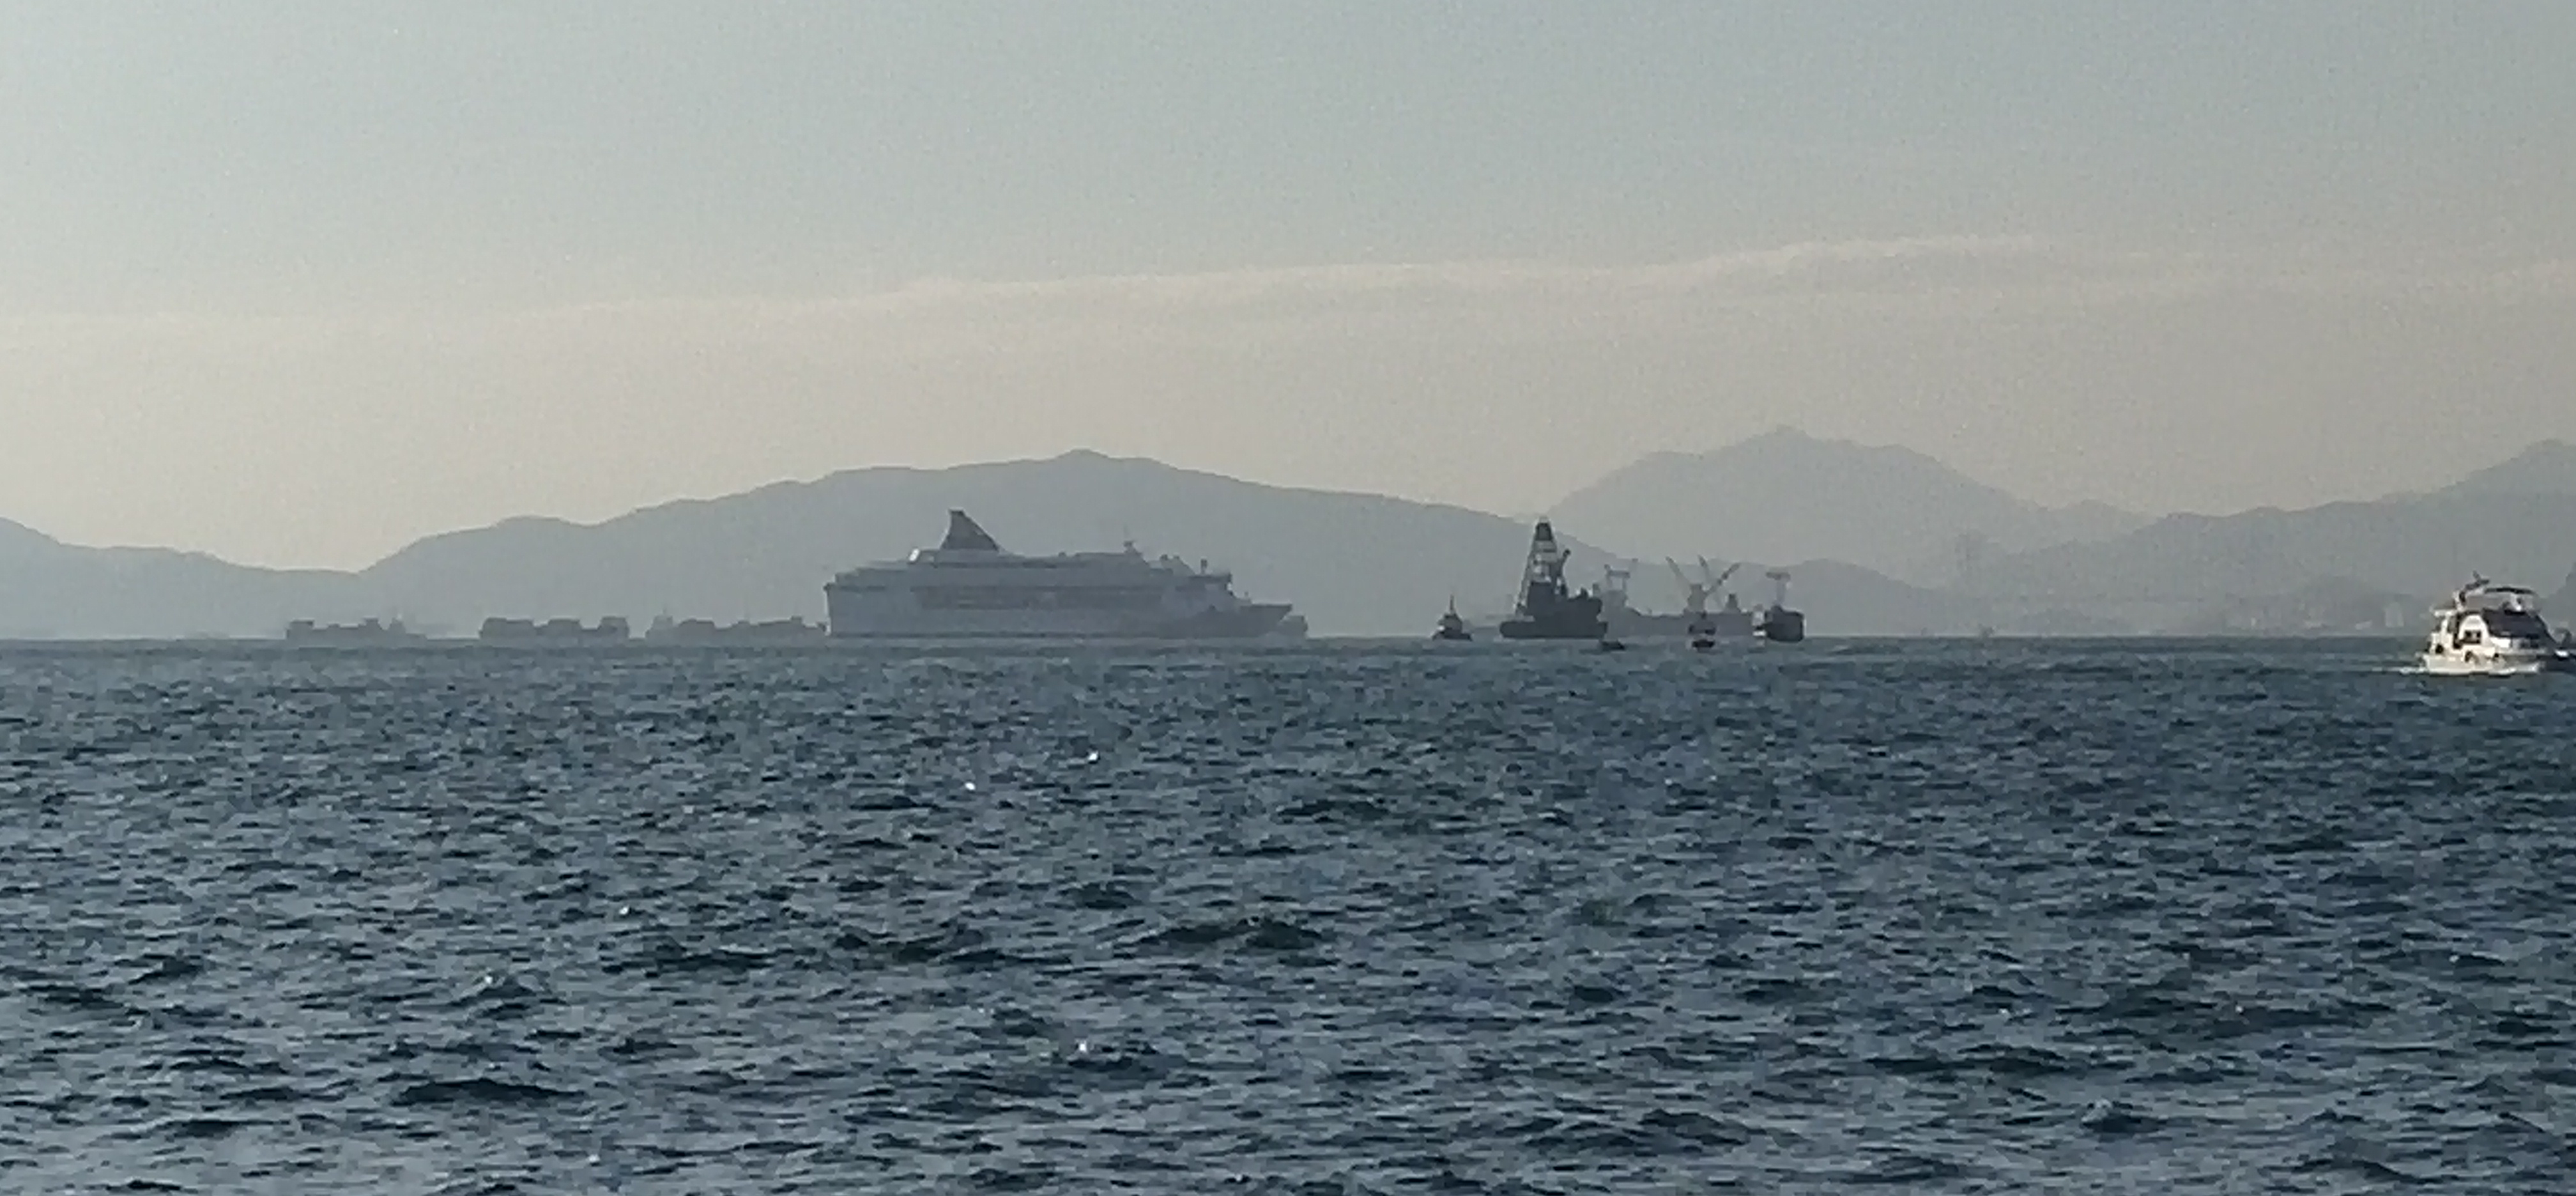 Star cruise has left the Ocean Terminal and is mooring at the sea.